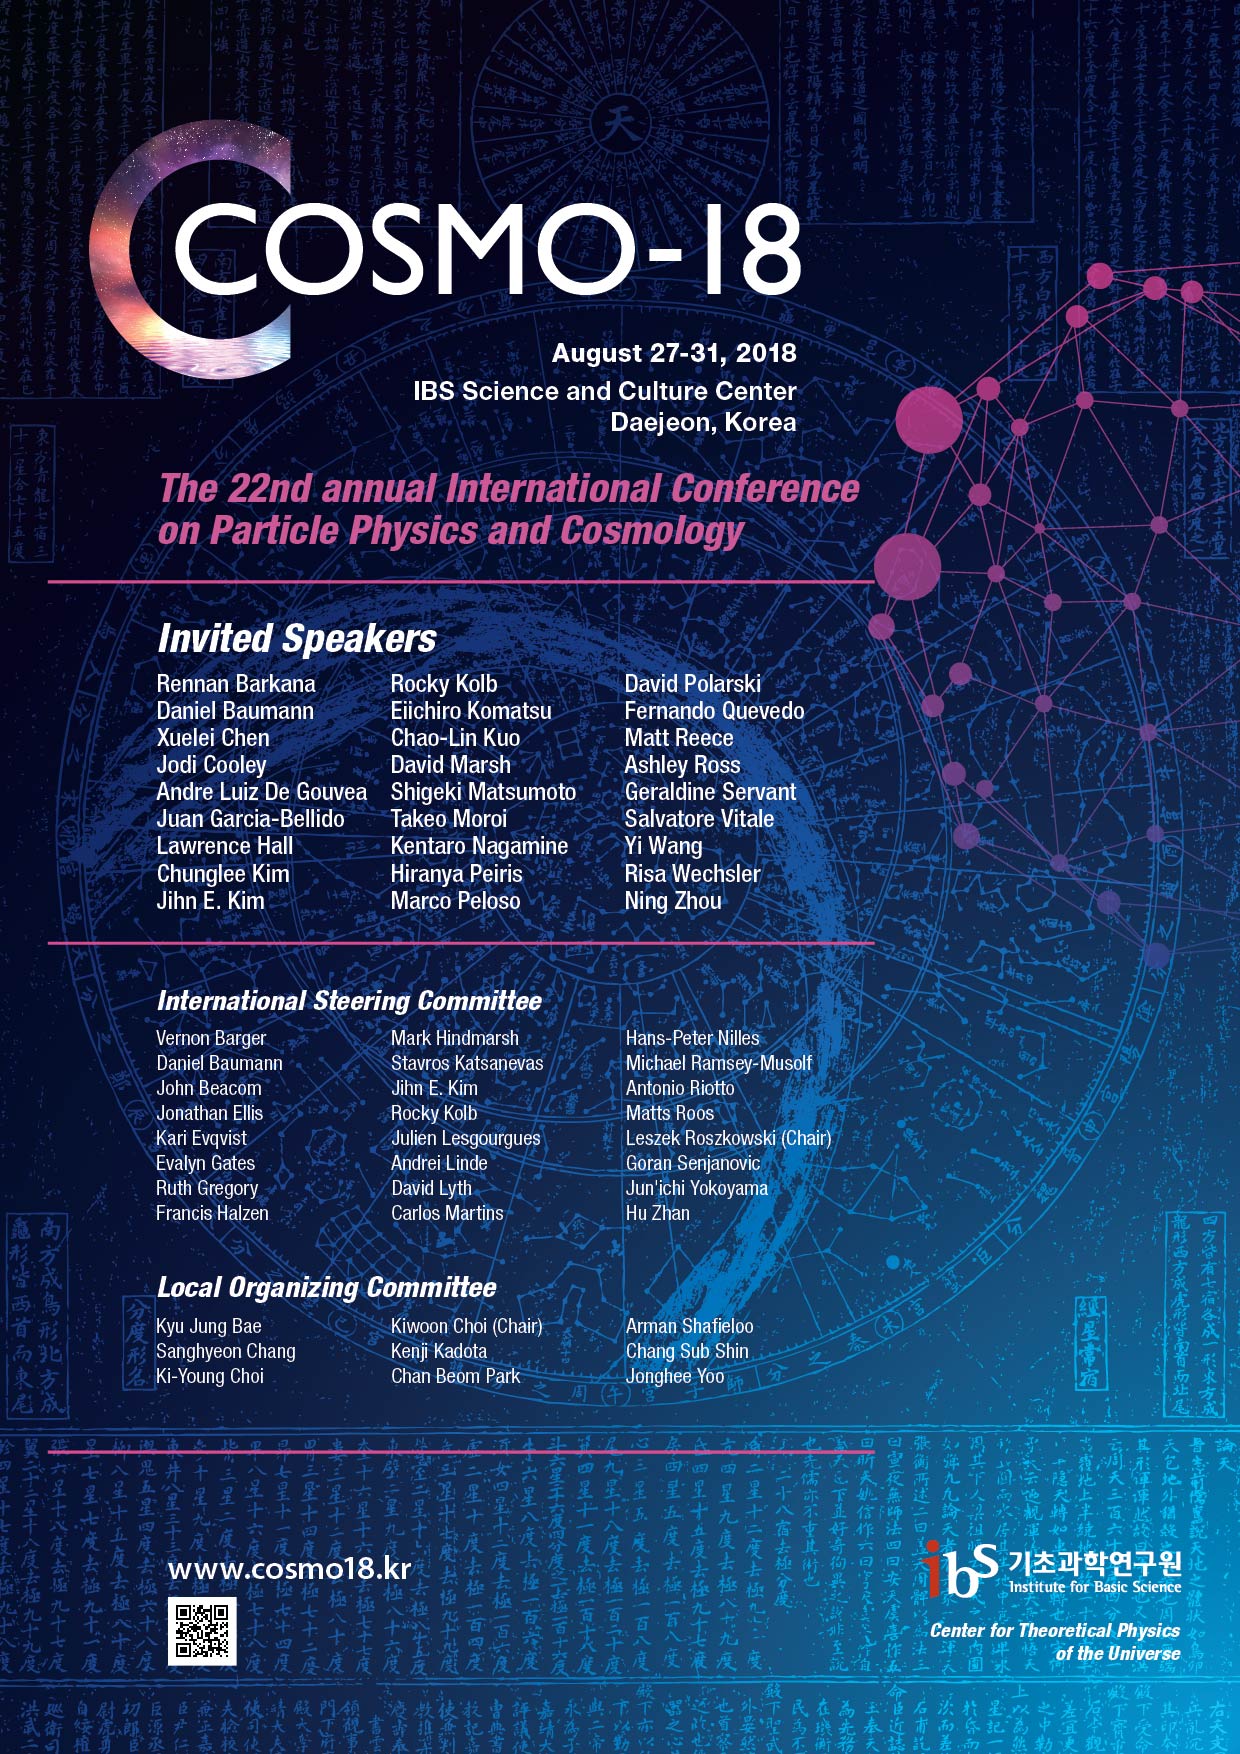 [Conference] The 22nd annual international Conference on Particle Physics and Cosmology (COSMO-18)  (Aug 27-31, 2018)